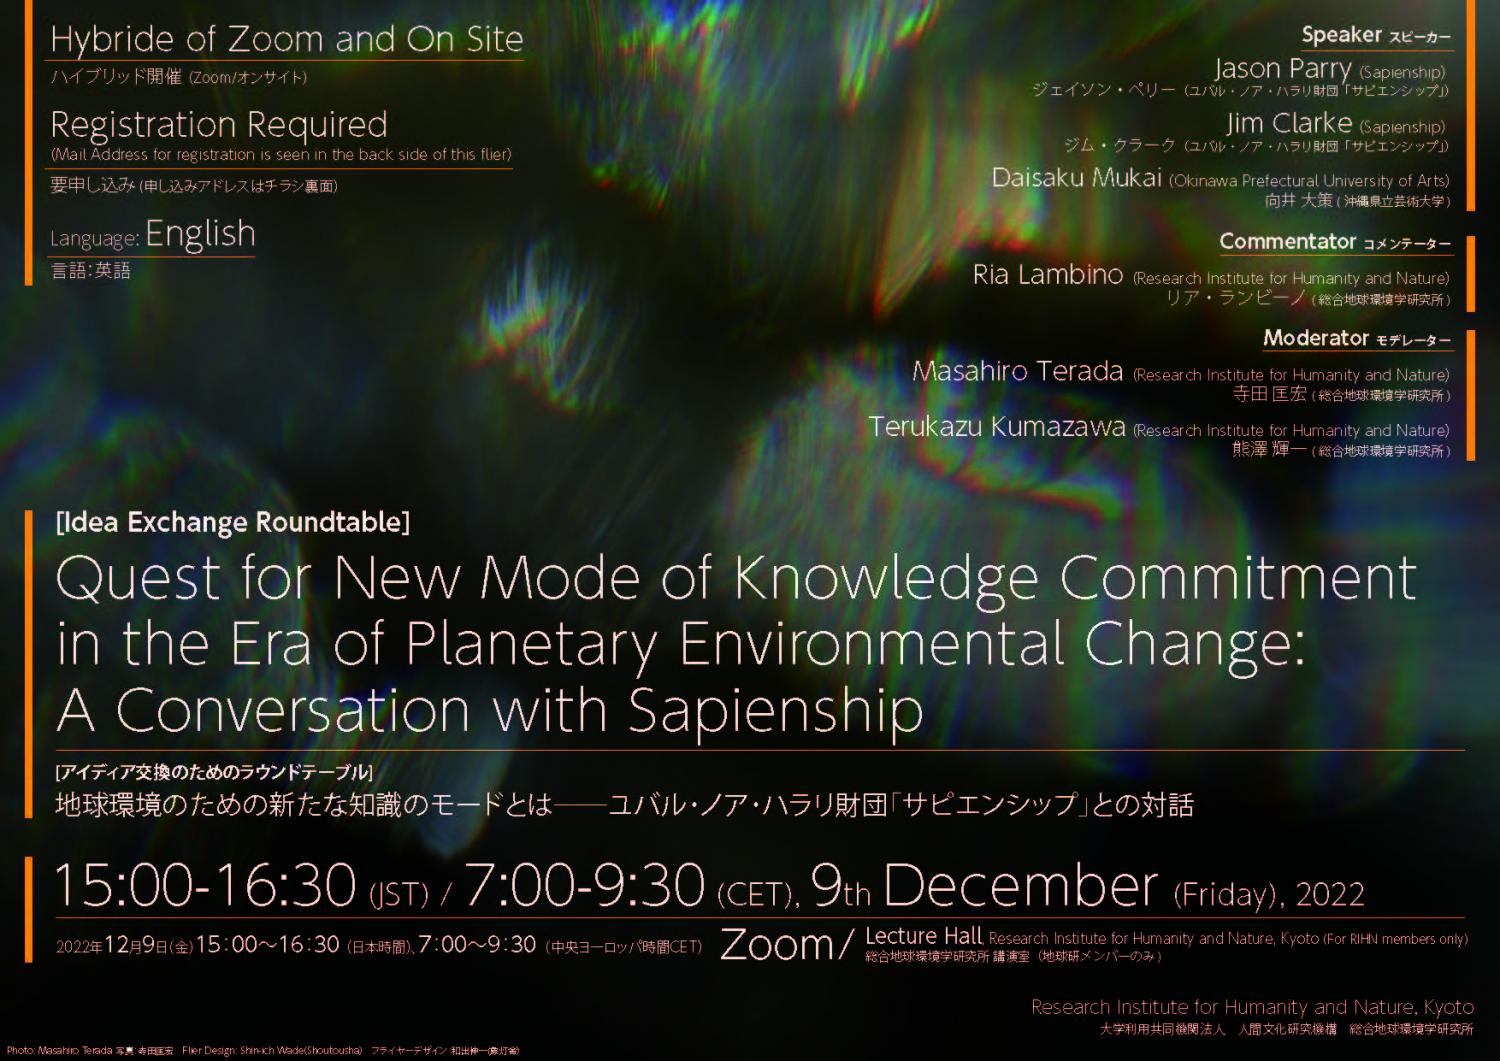 [Idea Exchange Roundtable] Quest for New Mode of Knowledge Commitment in the Era of Planetary Environmental Change: A Conversation with Sapienship